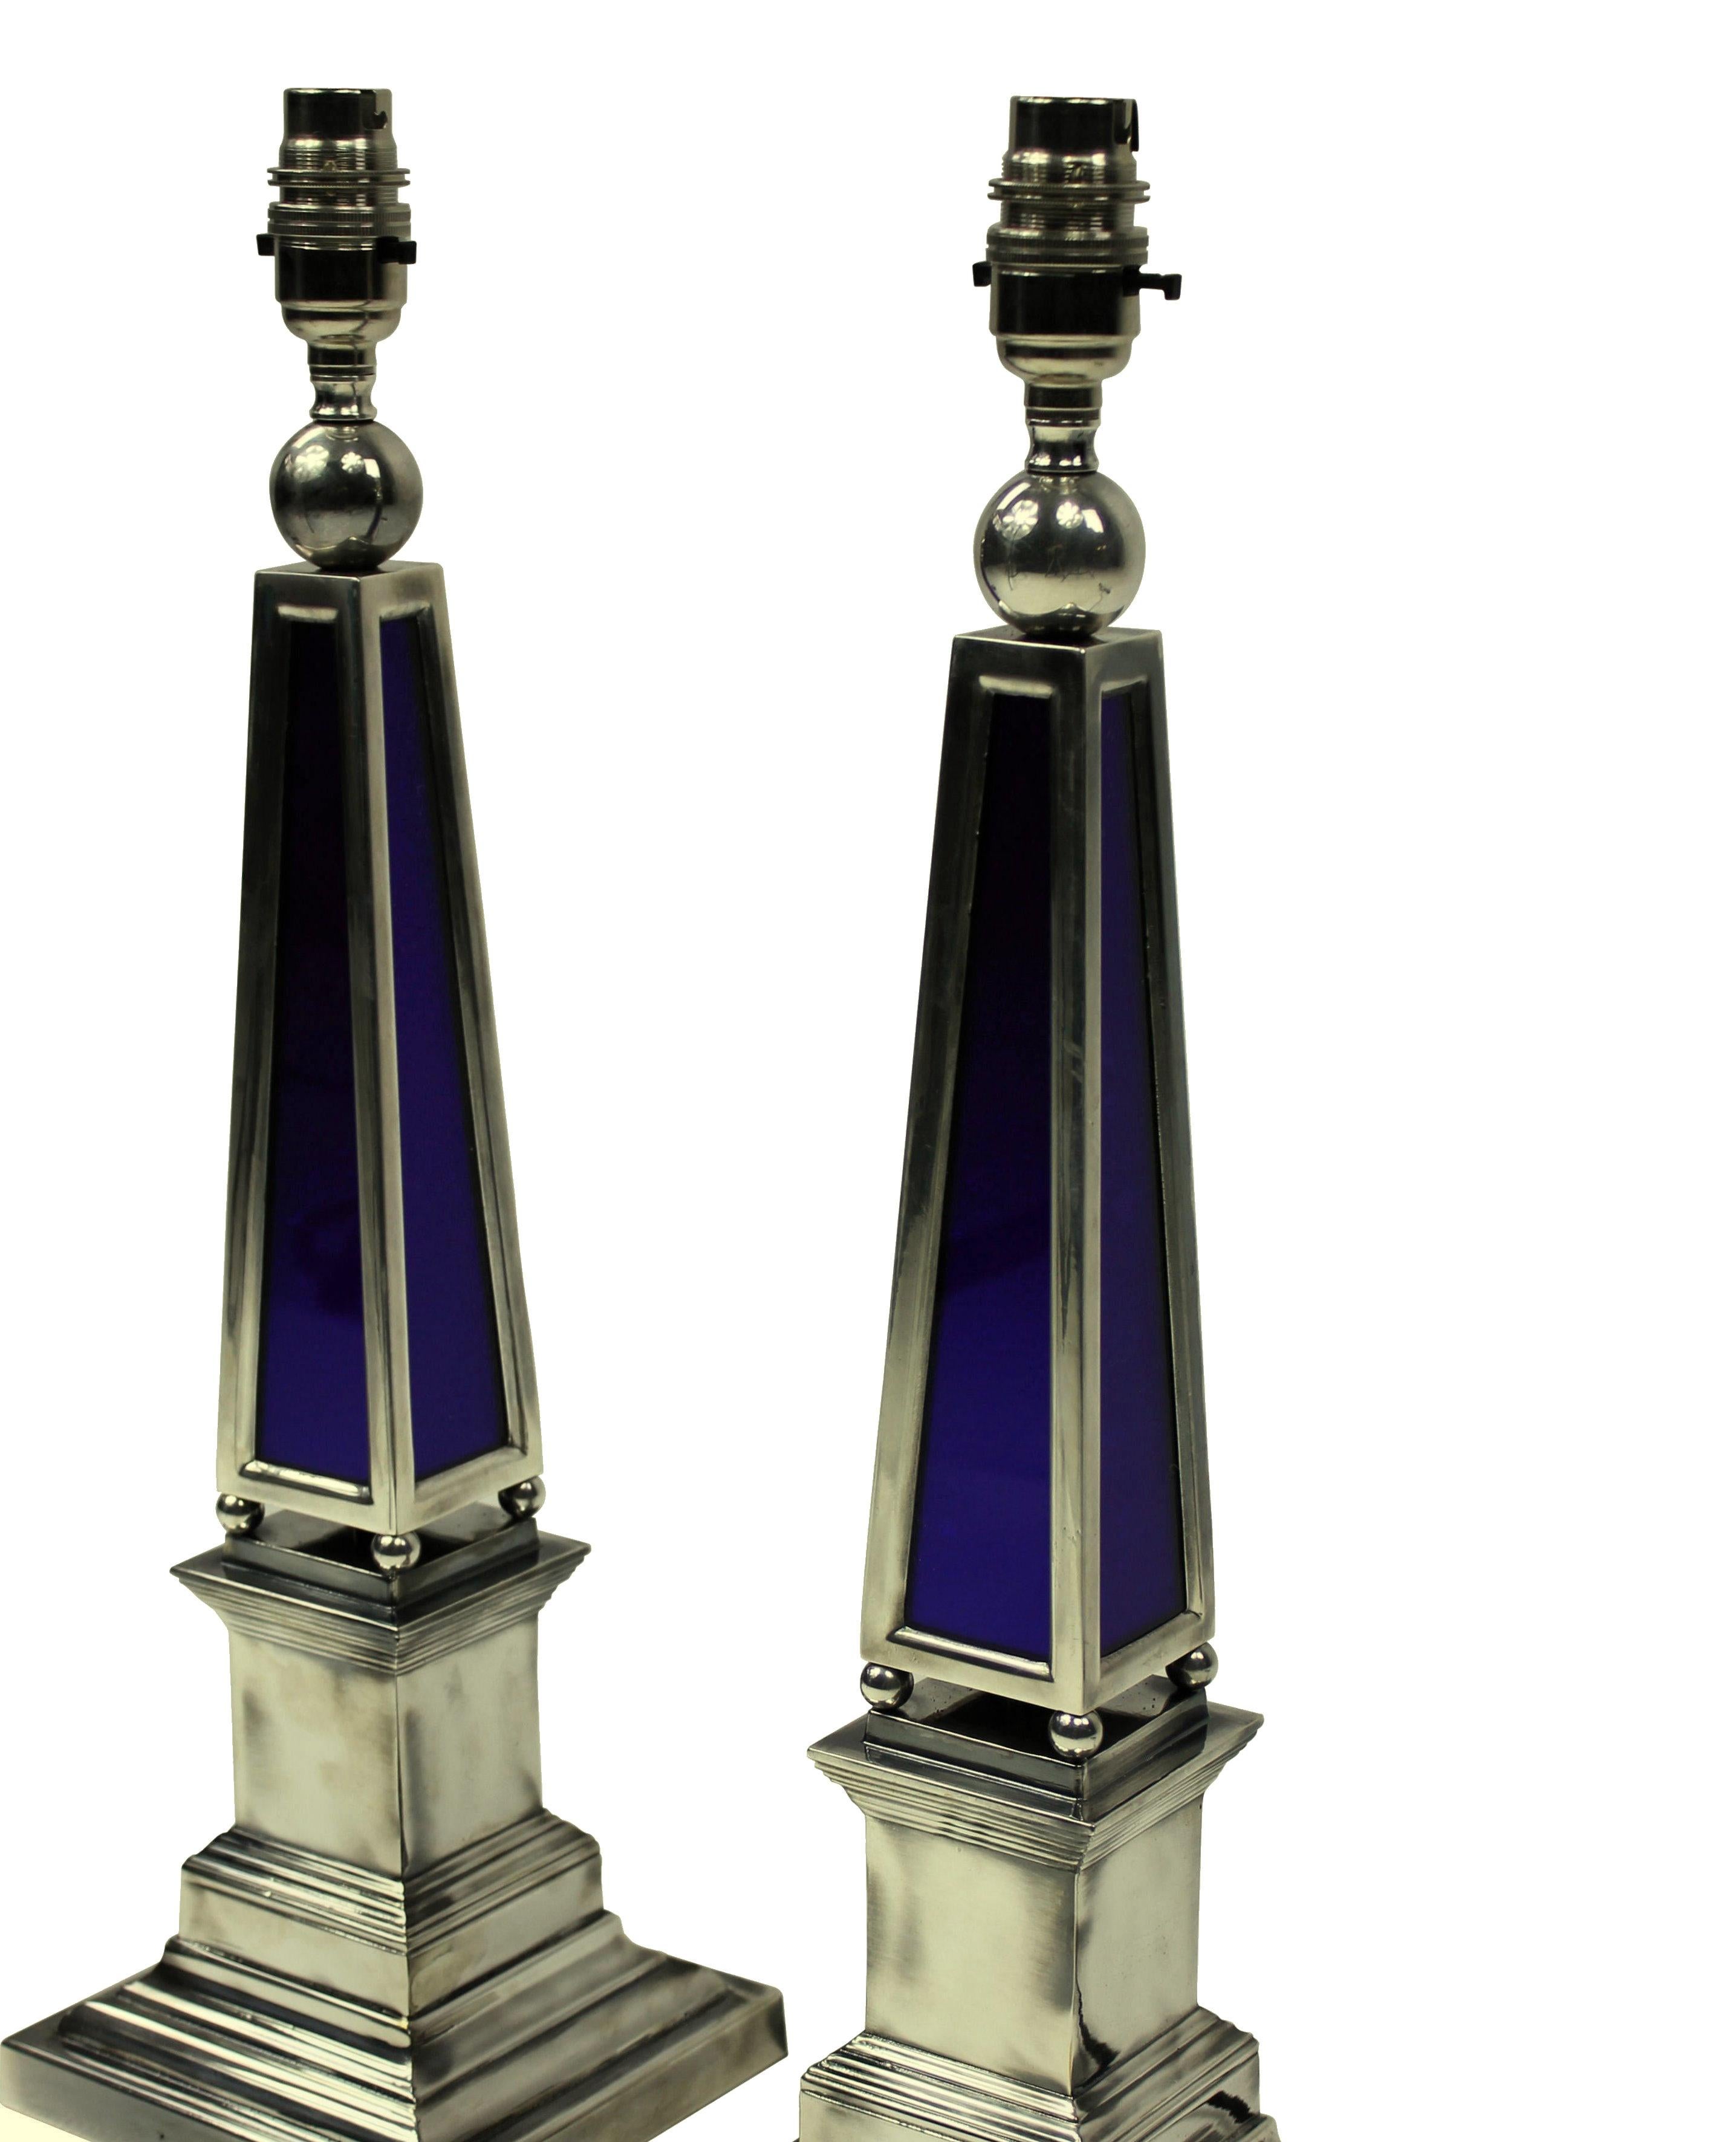 A pair of English silver plated obelisk lamps with blue glass panels.

These lamps are made to order for Ebury trading.

These items are subjected to VAT.